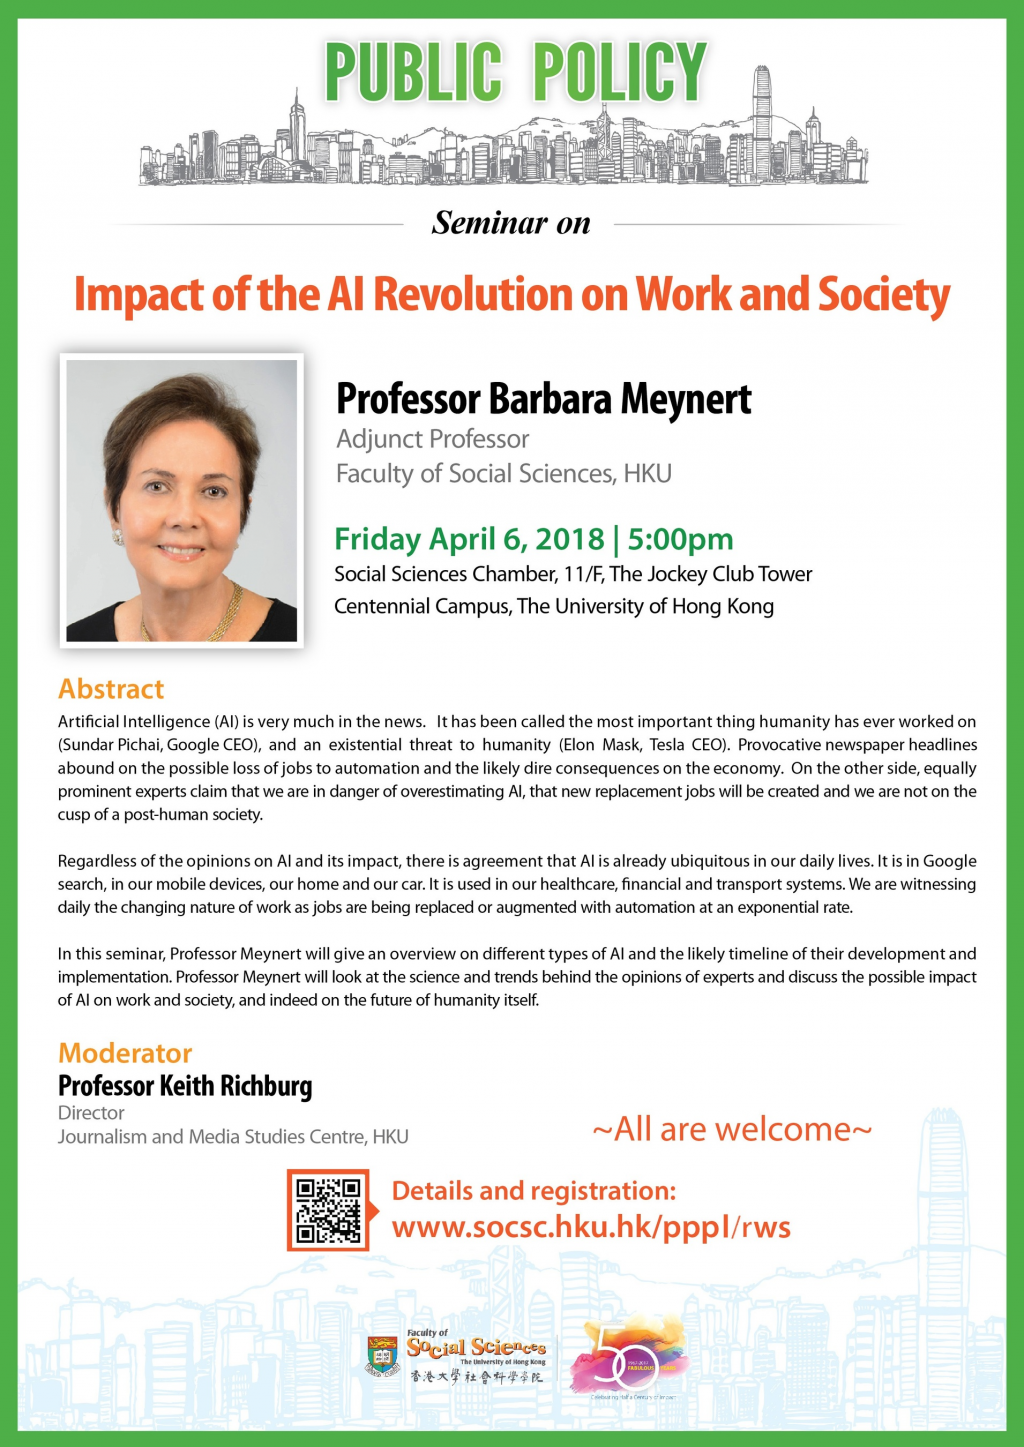 Public Policy Seminar: Impact of the AI Revolution on Work and Society